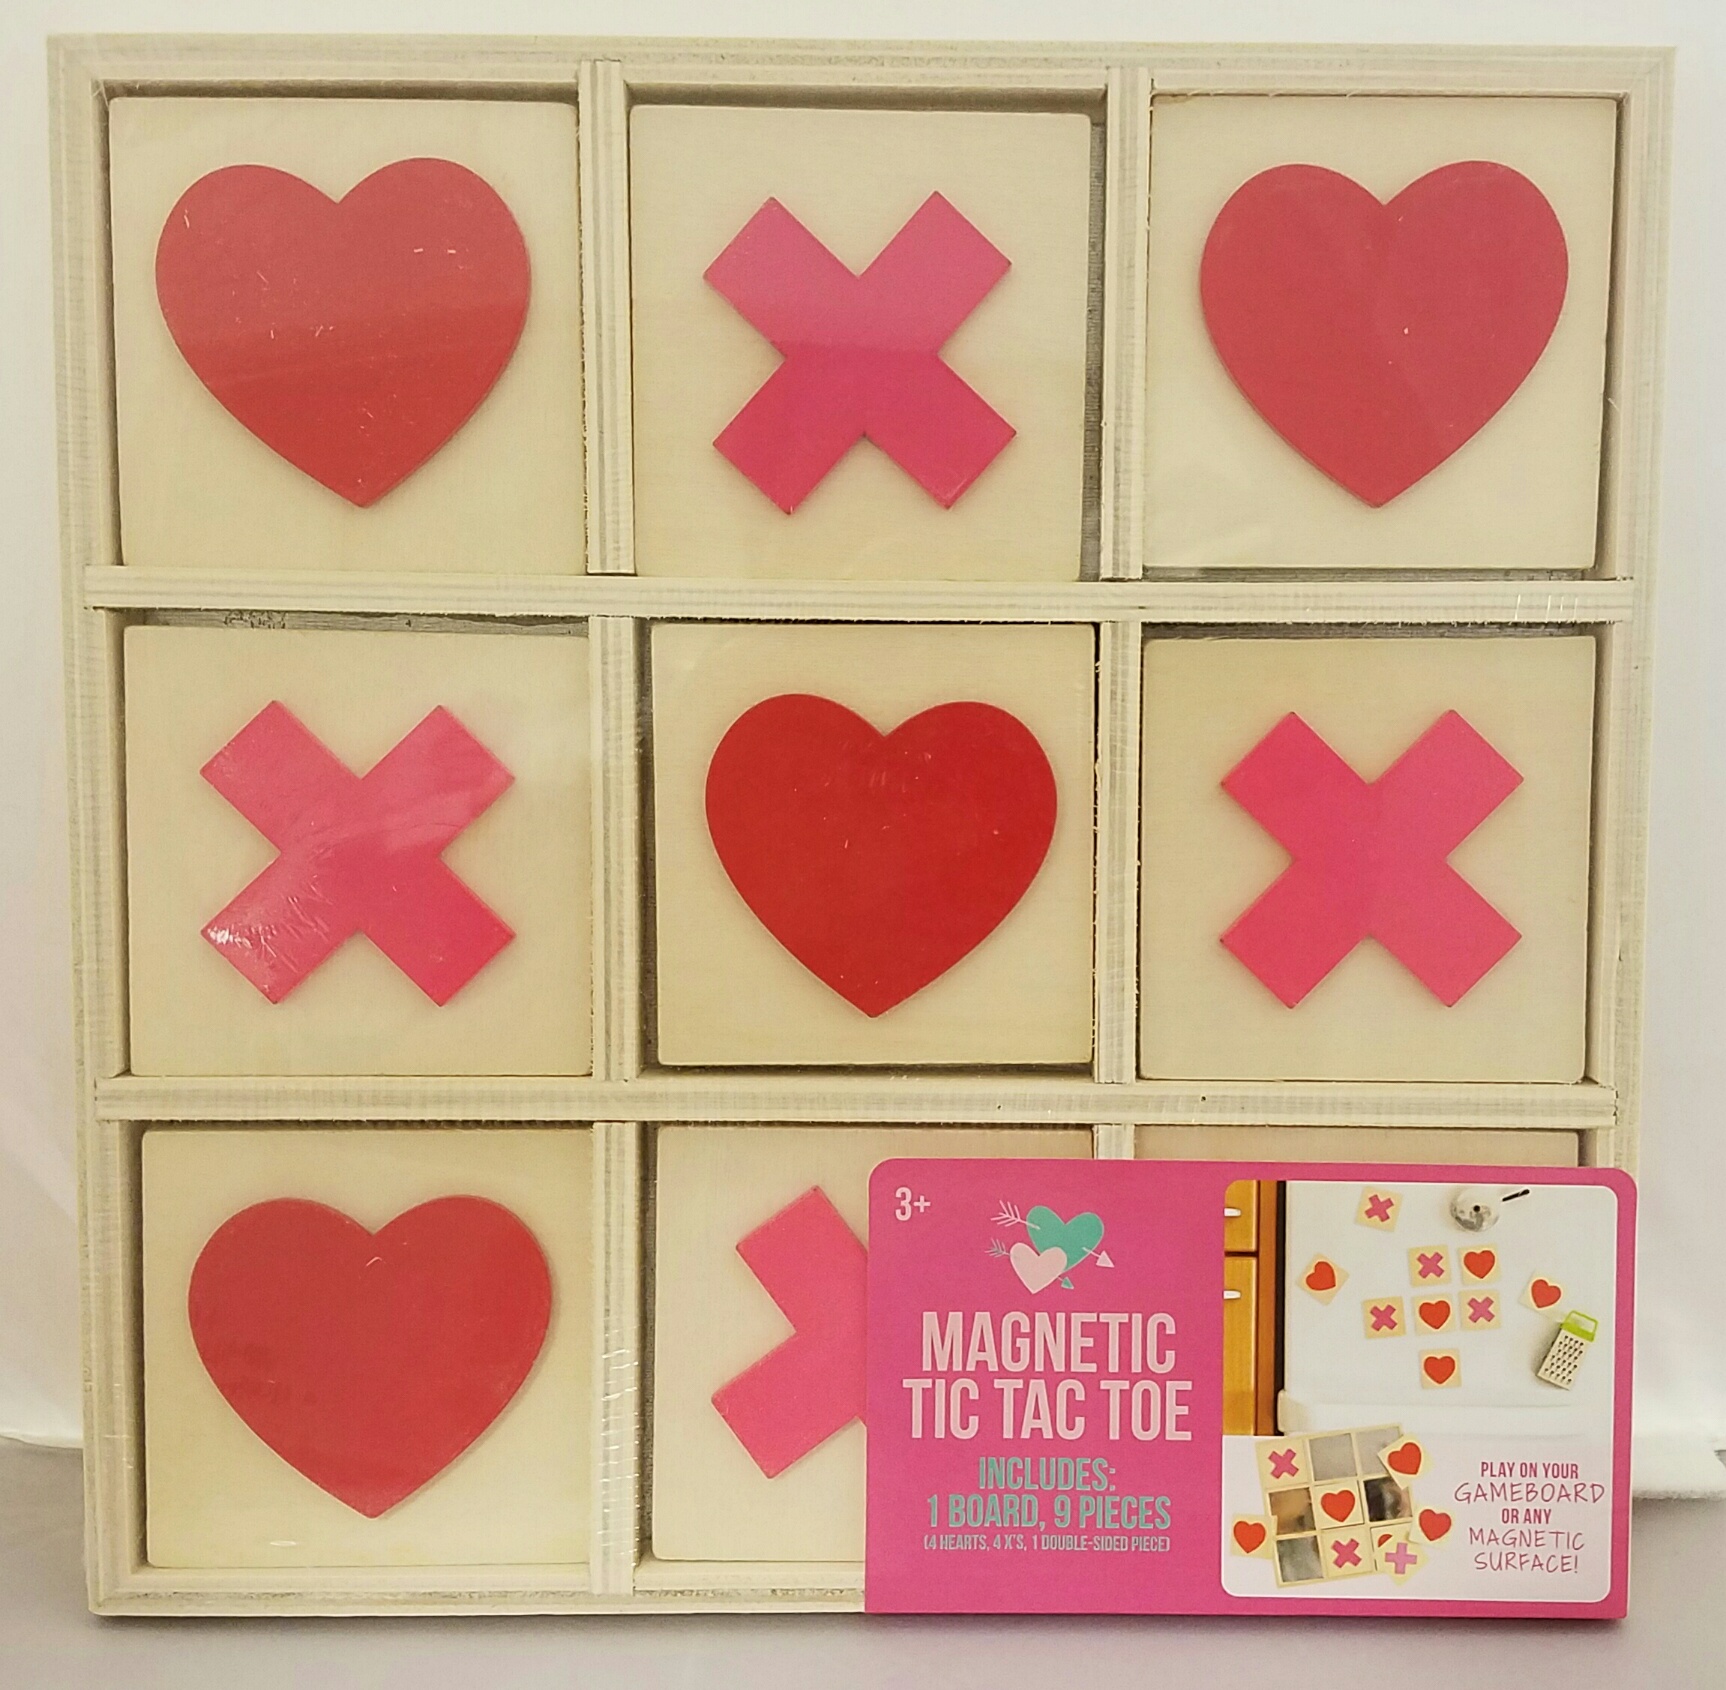 Target Recalls Magnetic Tic Tac Toe Games Due to Choking and Magnet Ingestion Hazards